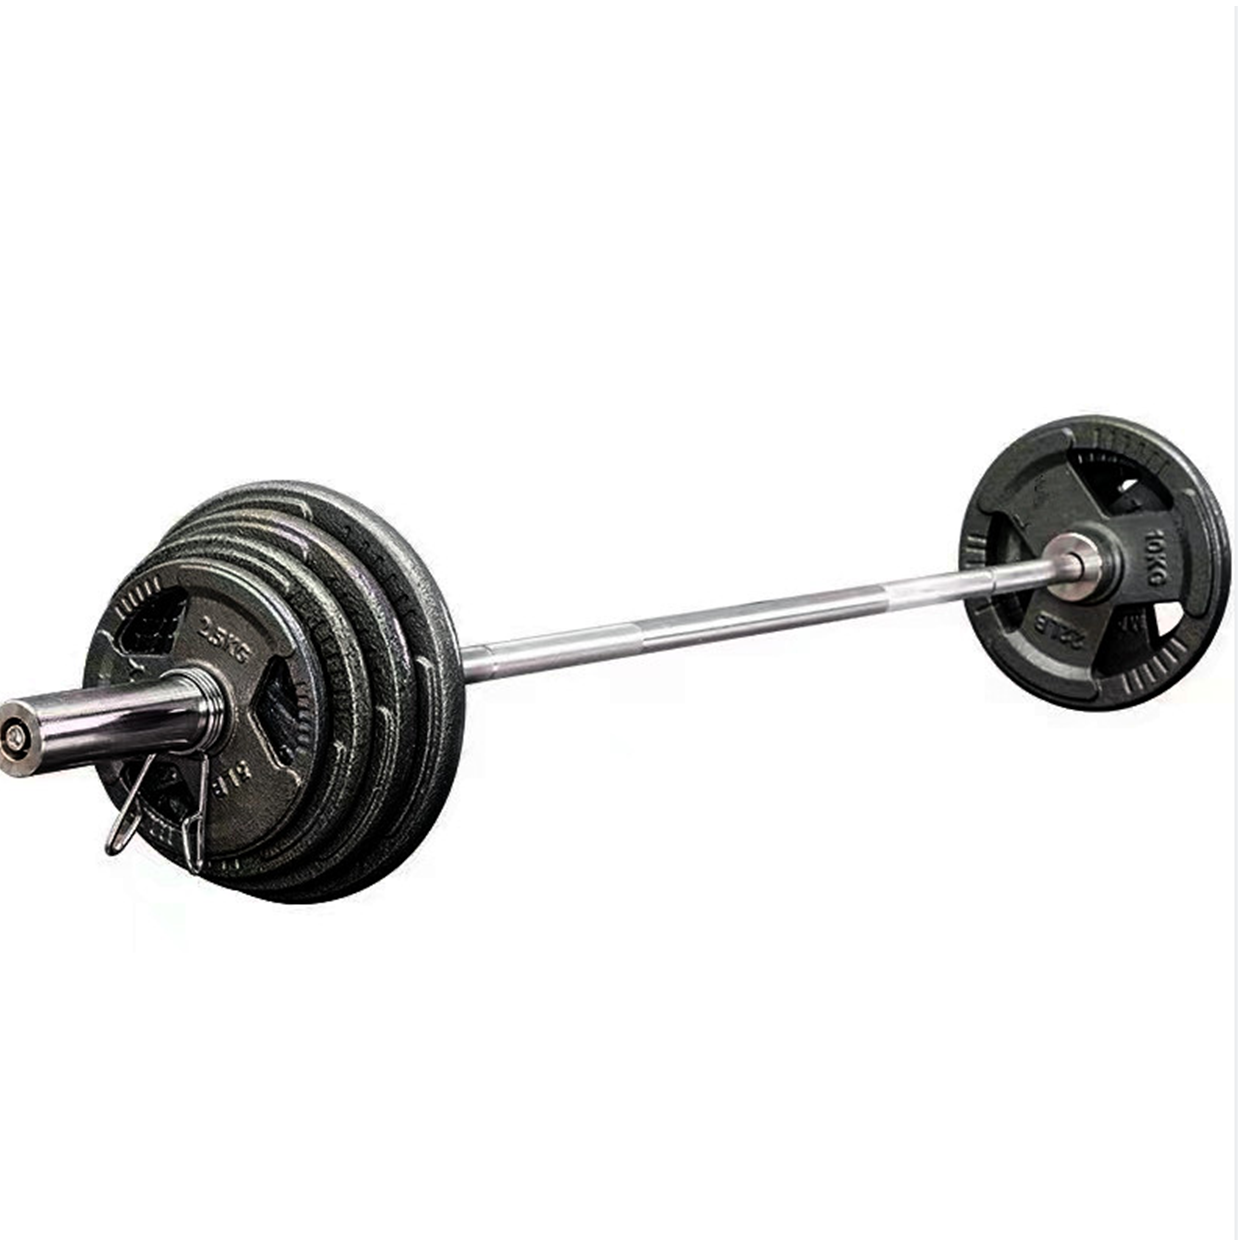 95KG Metal Weights Set with 15KG Olympic Barbell